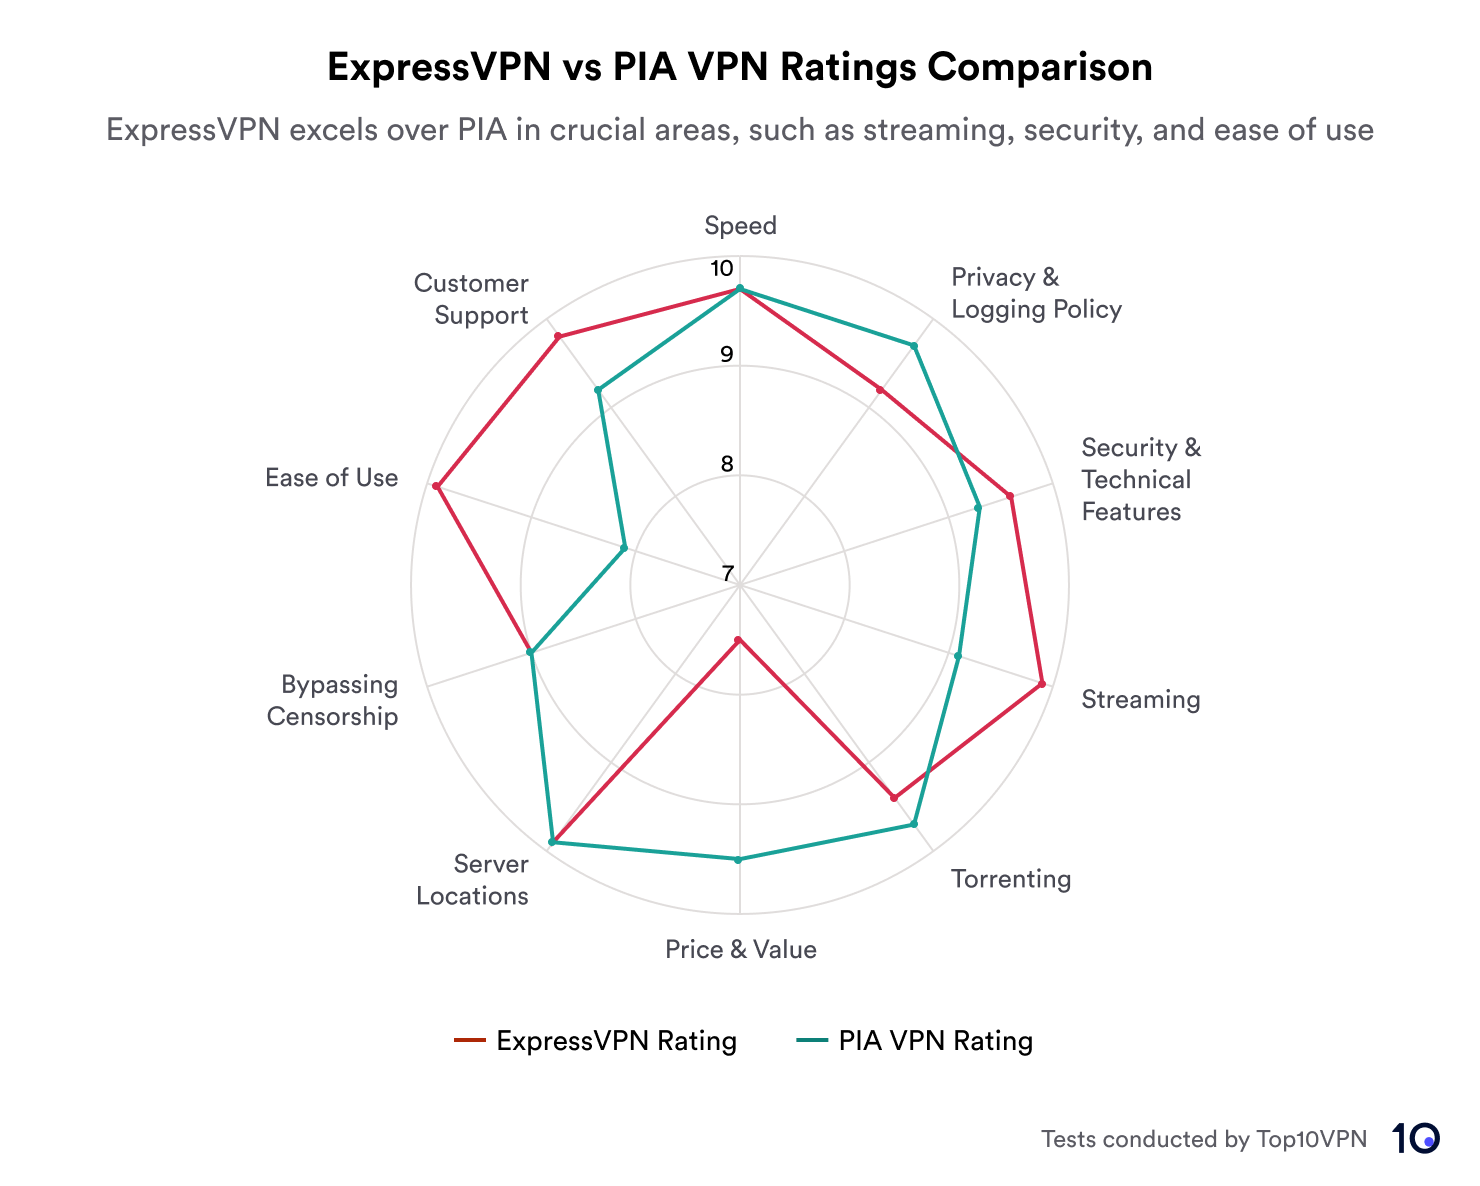 Radar chart comparing ExpressVPN's and PIA VPN's performance ratings